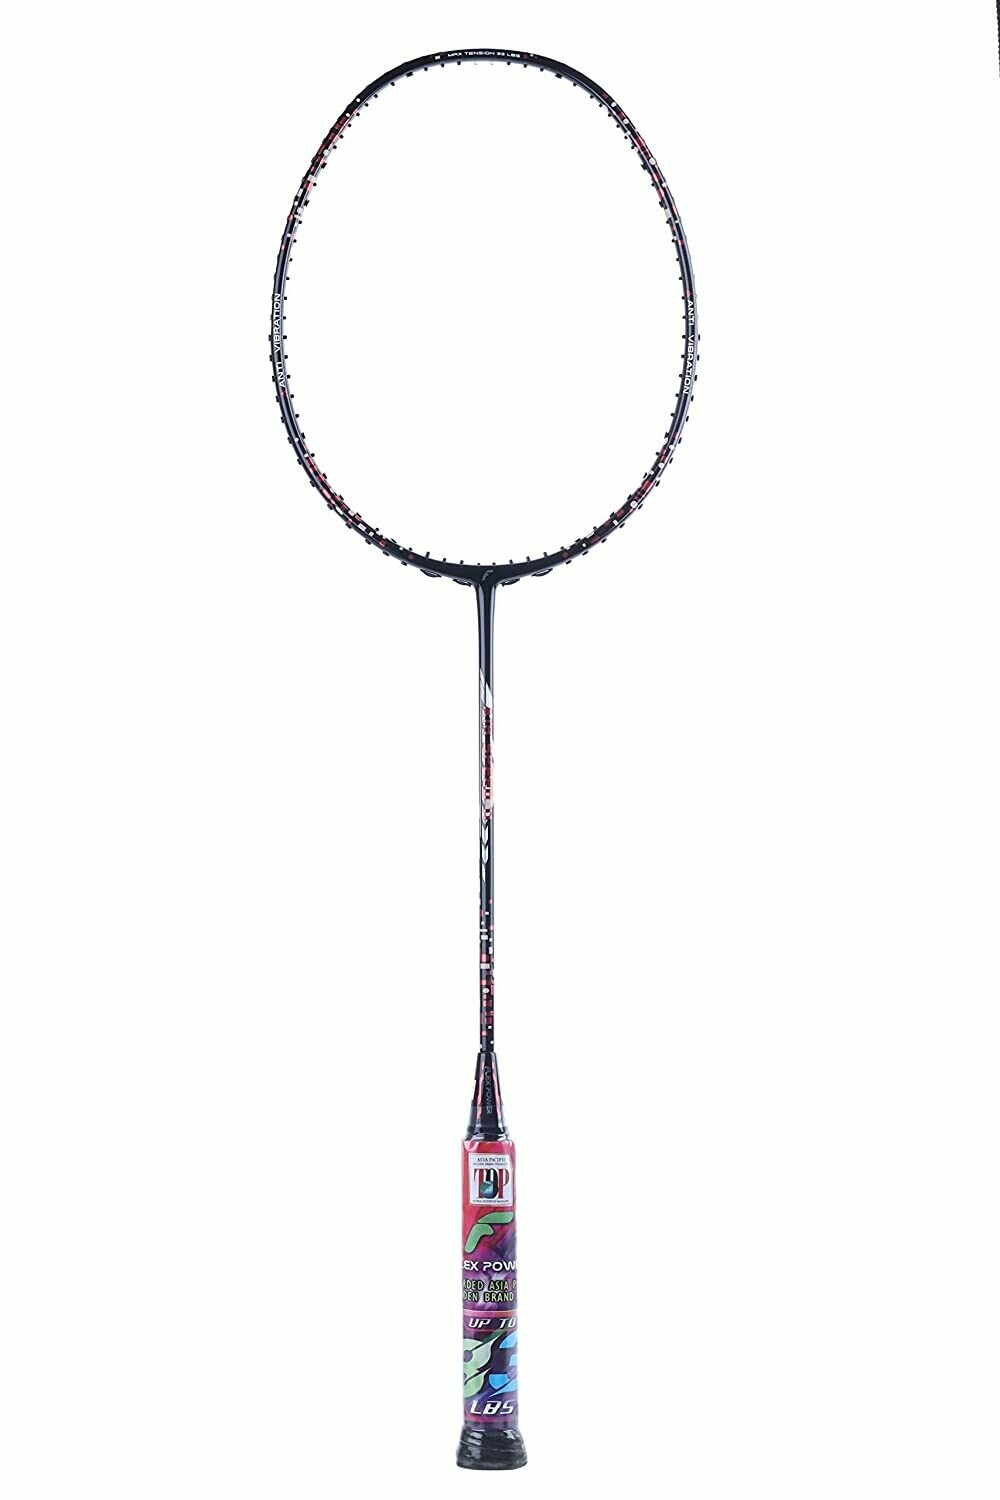 Flex Power Air Speed 11 Mega Tension - 33LBS Full Graphite Badminton Racquet with Full Racket Cover Black/Red